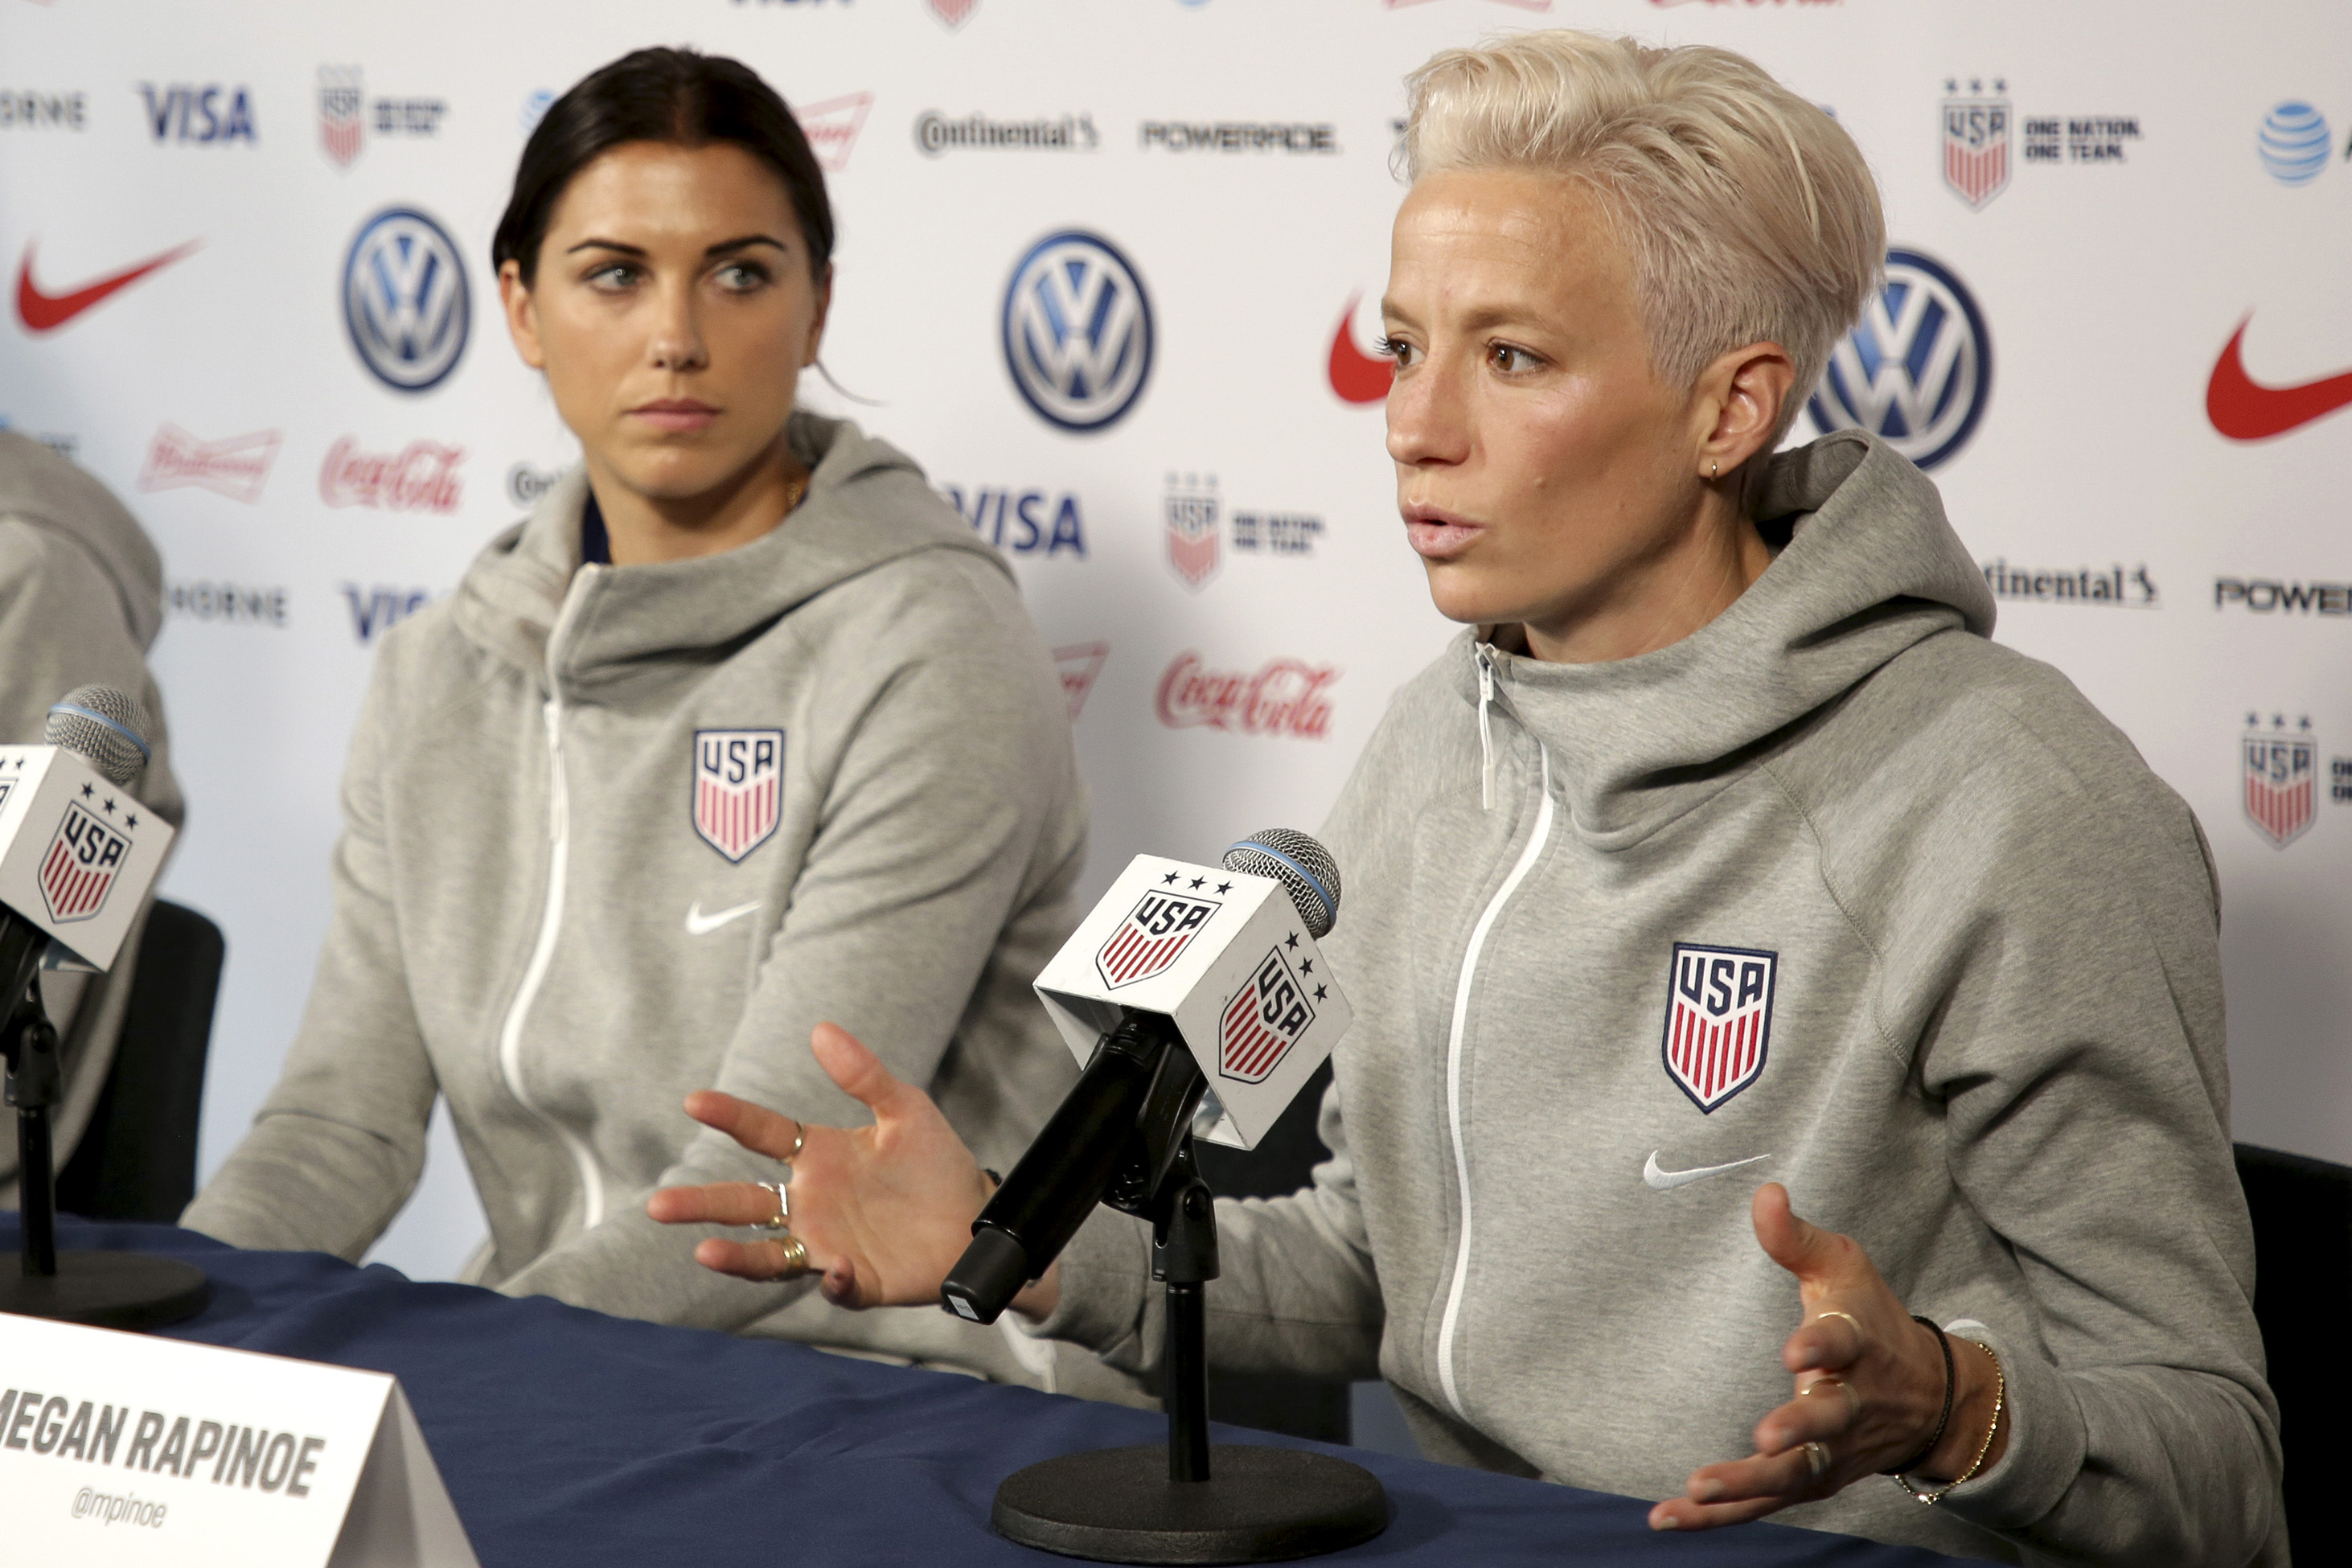 US women's soccer secures equal pay, $24 million after six-year legal battle - New York Post 